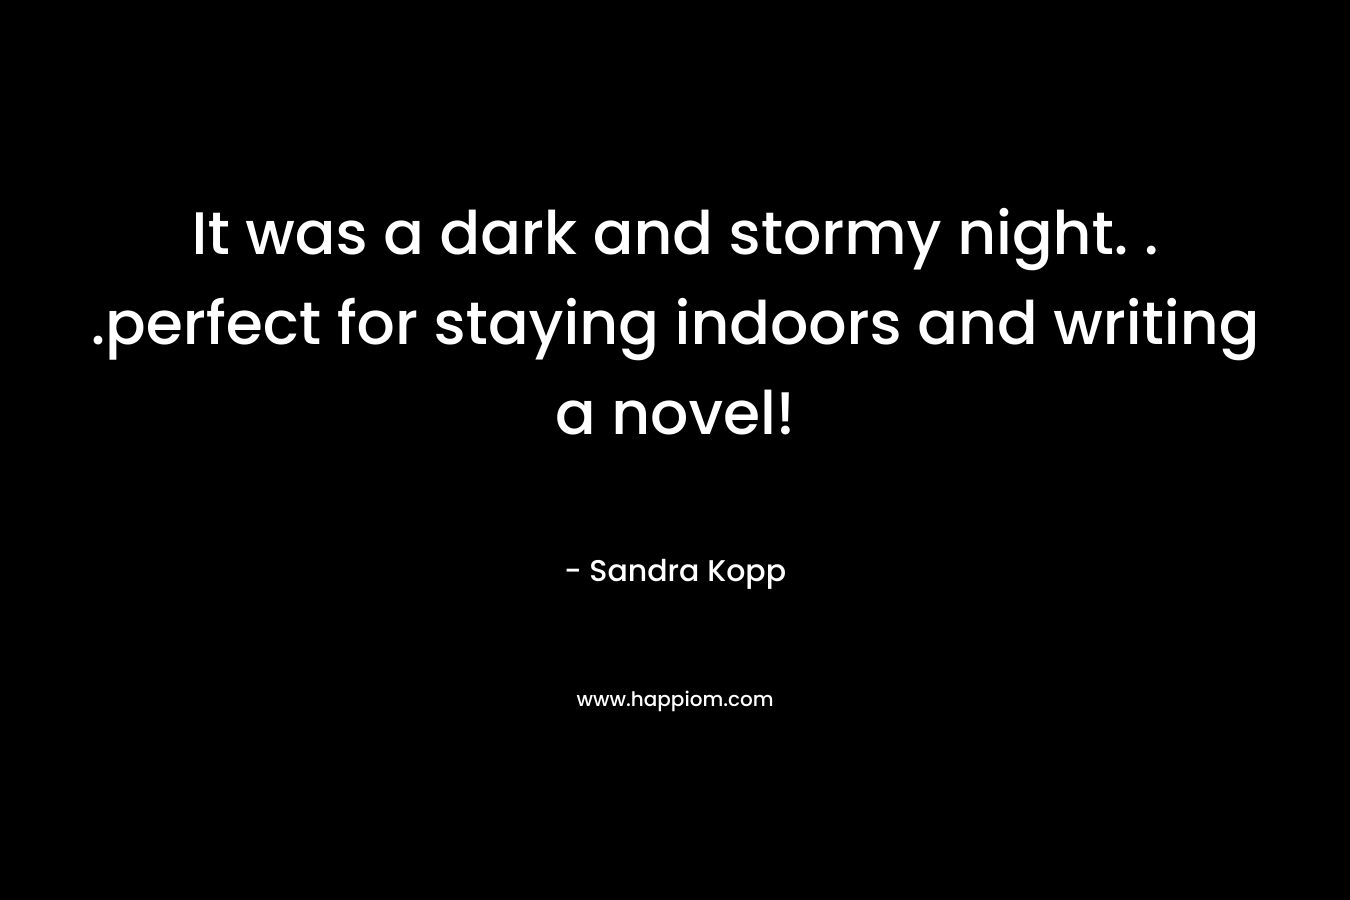 It was a dark and stormy night. . .perfect for staying indoors and writing a novel!